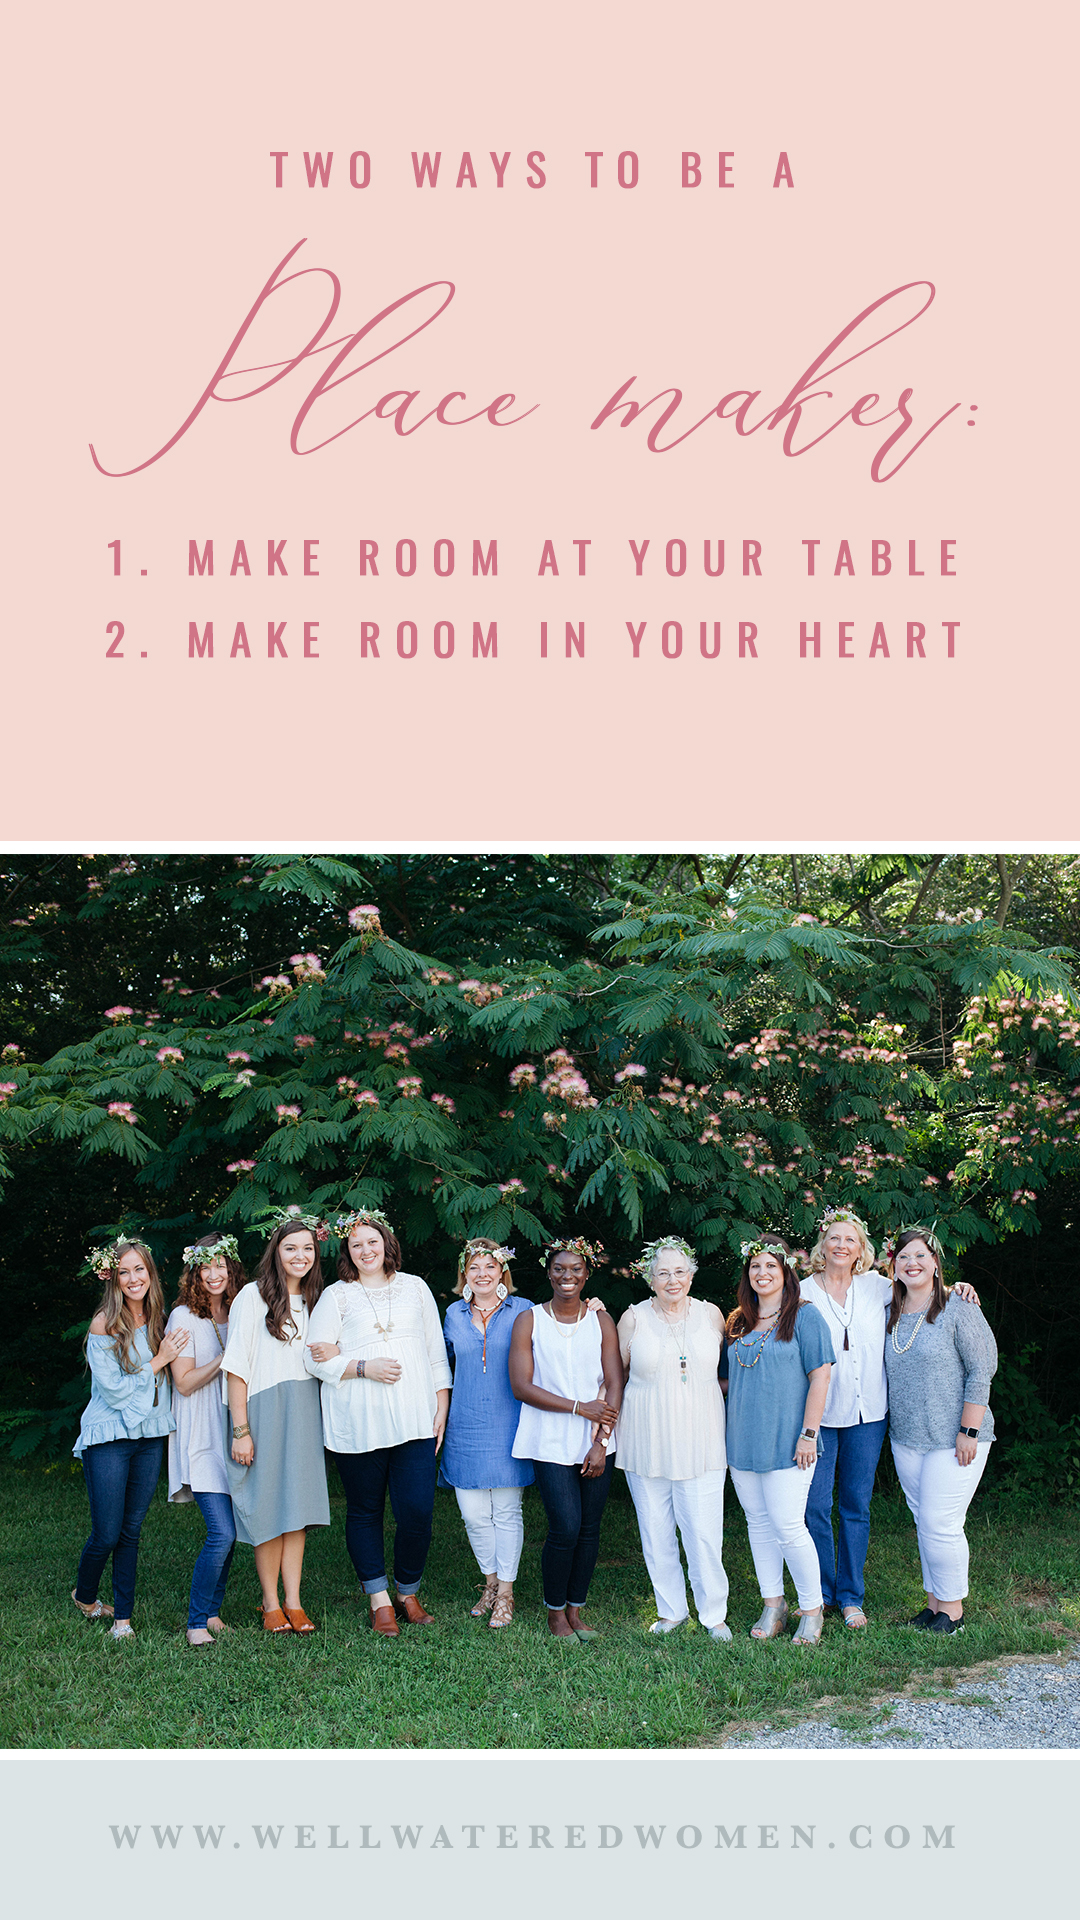 How to be a "place maker" as a Christian Woman - make room and be inclusive